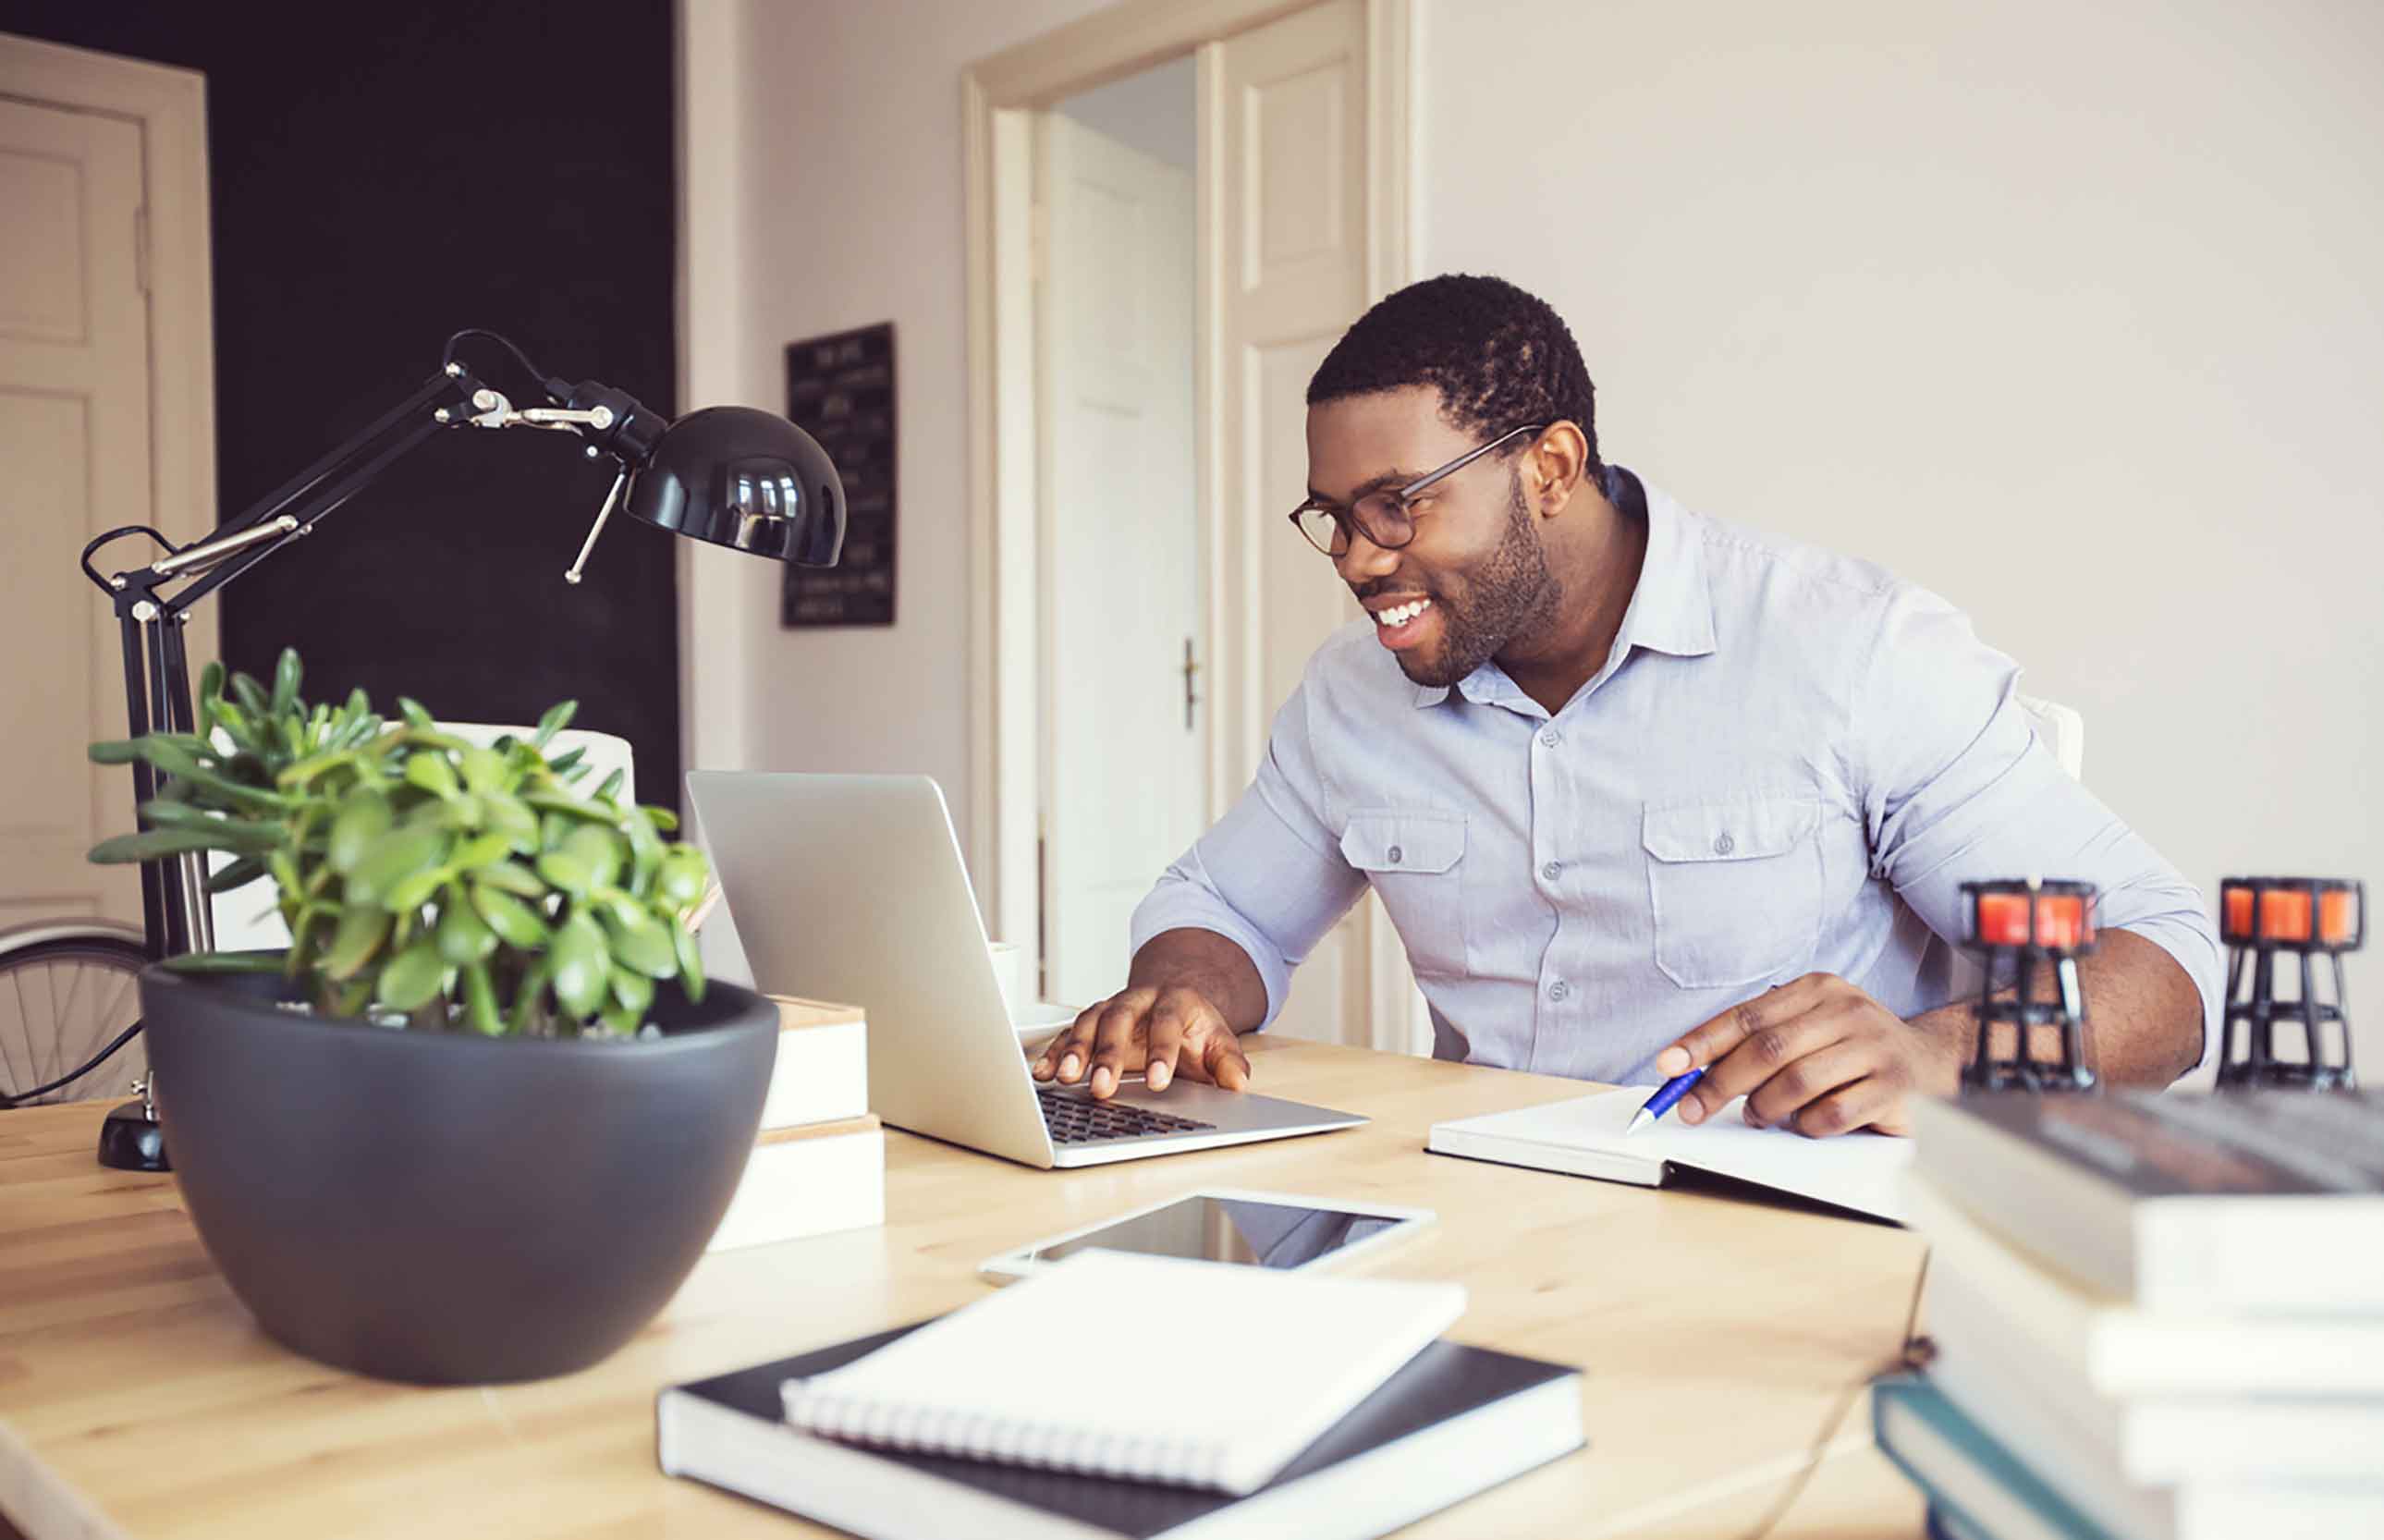 Looking to work at home? It might surprise you, but where you live matters. Here are the best states for telecommuting jobs.